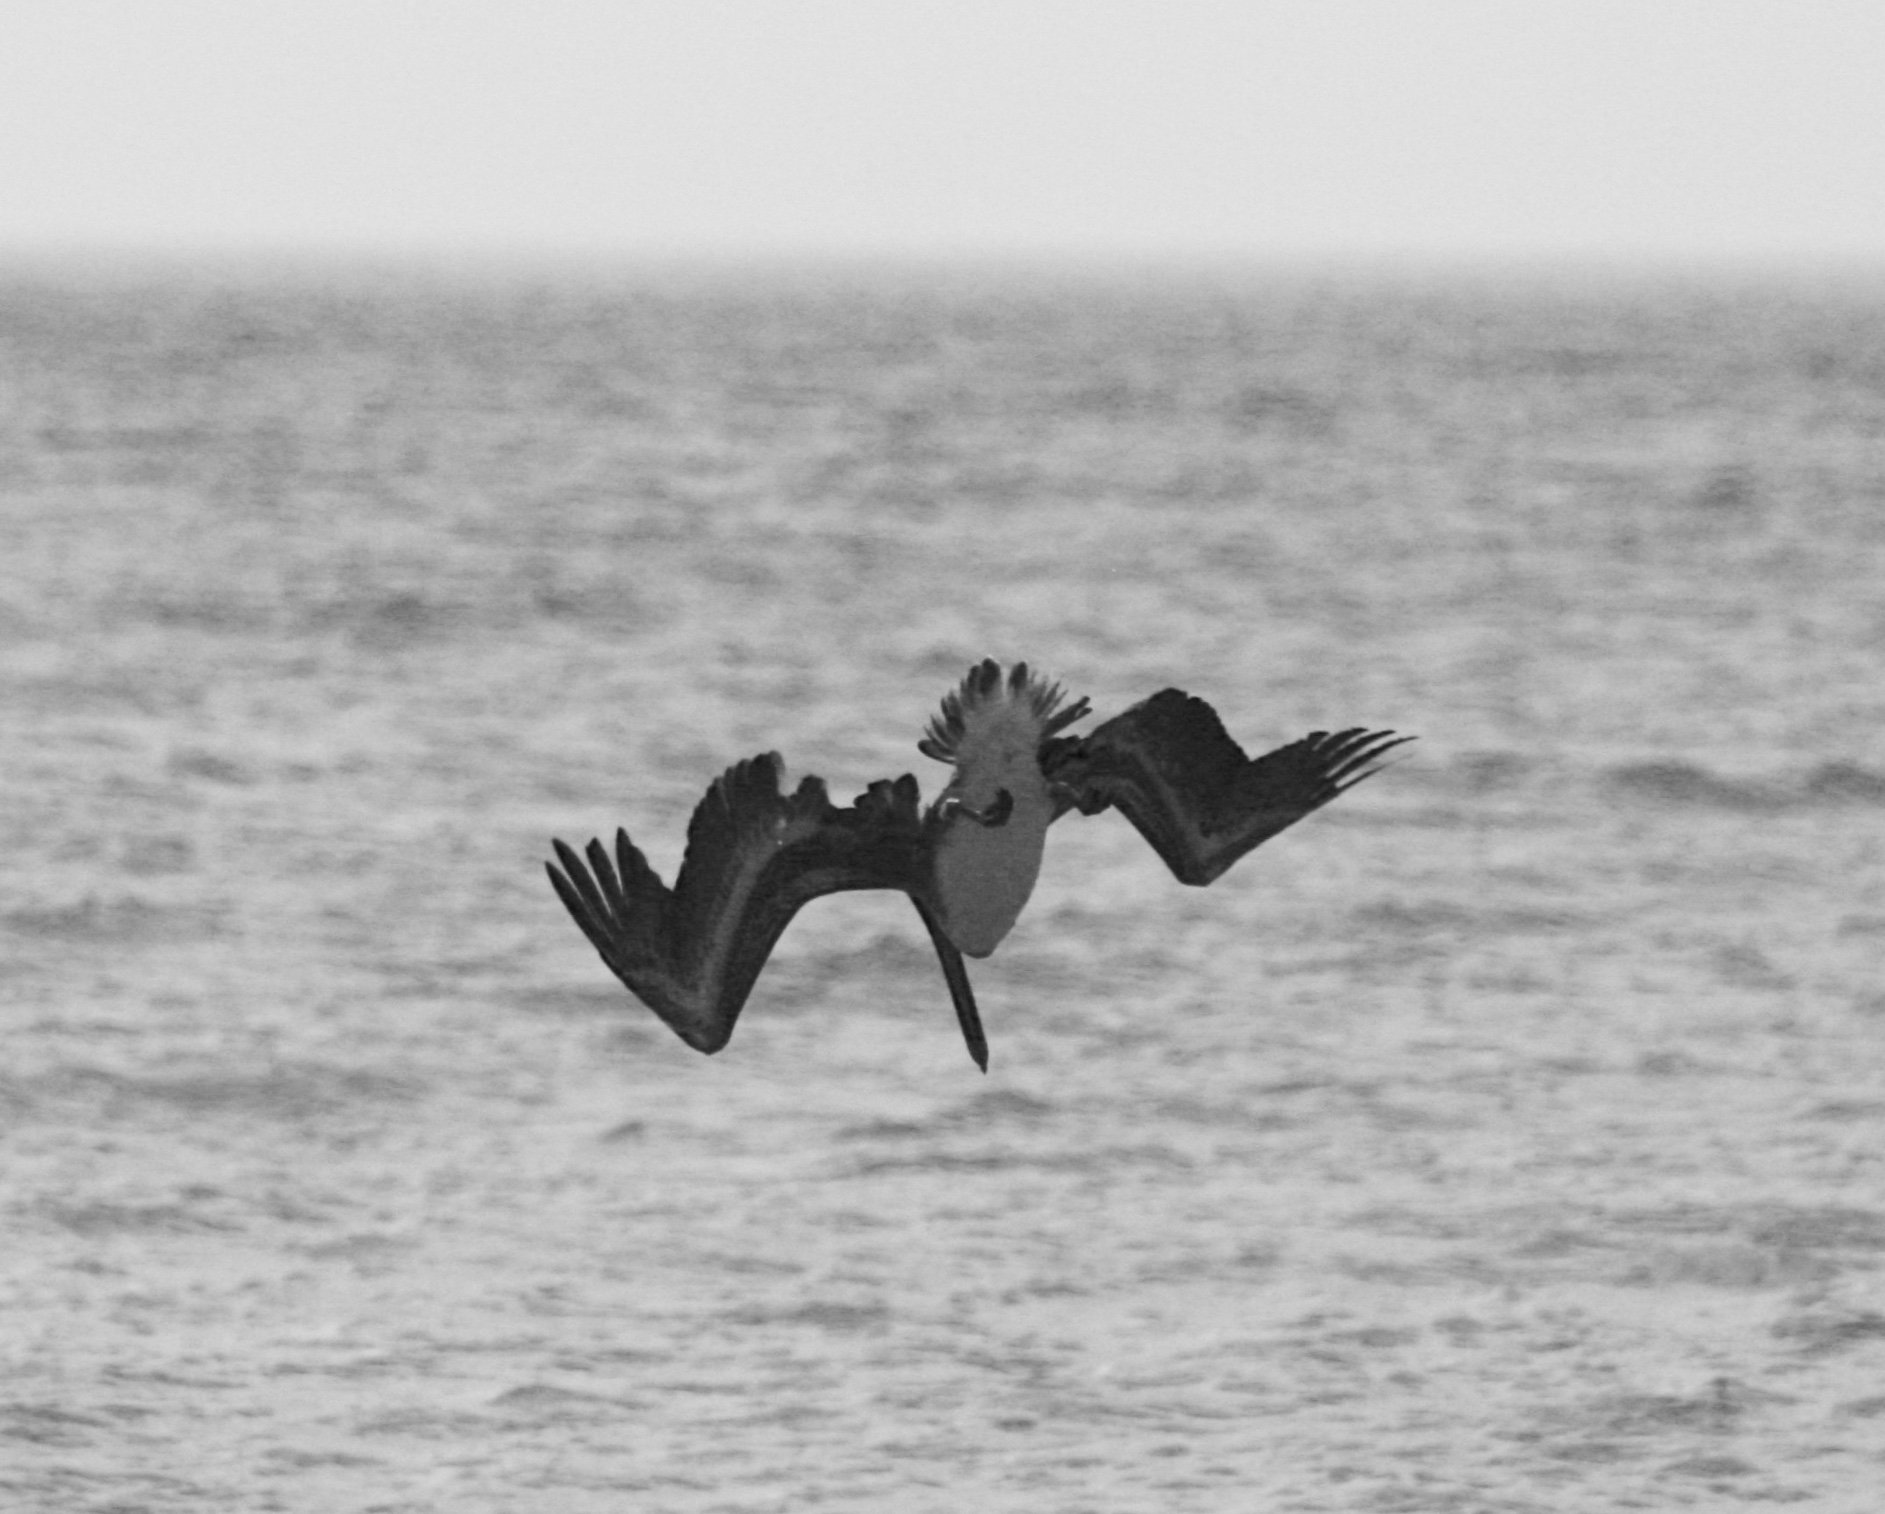 Why Didnt You Tell Me - Pelican dives